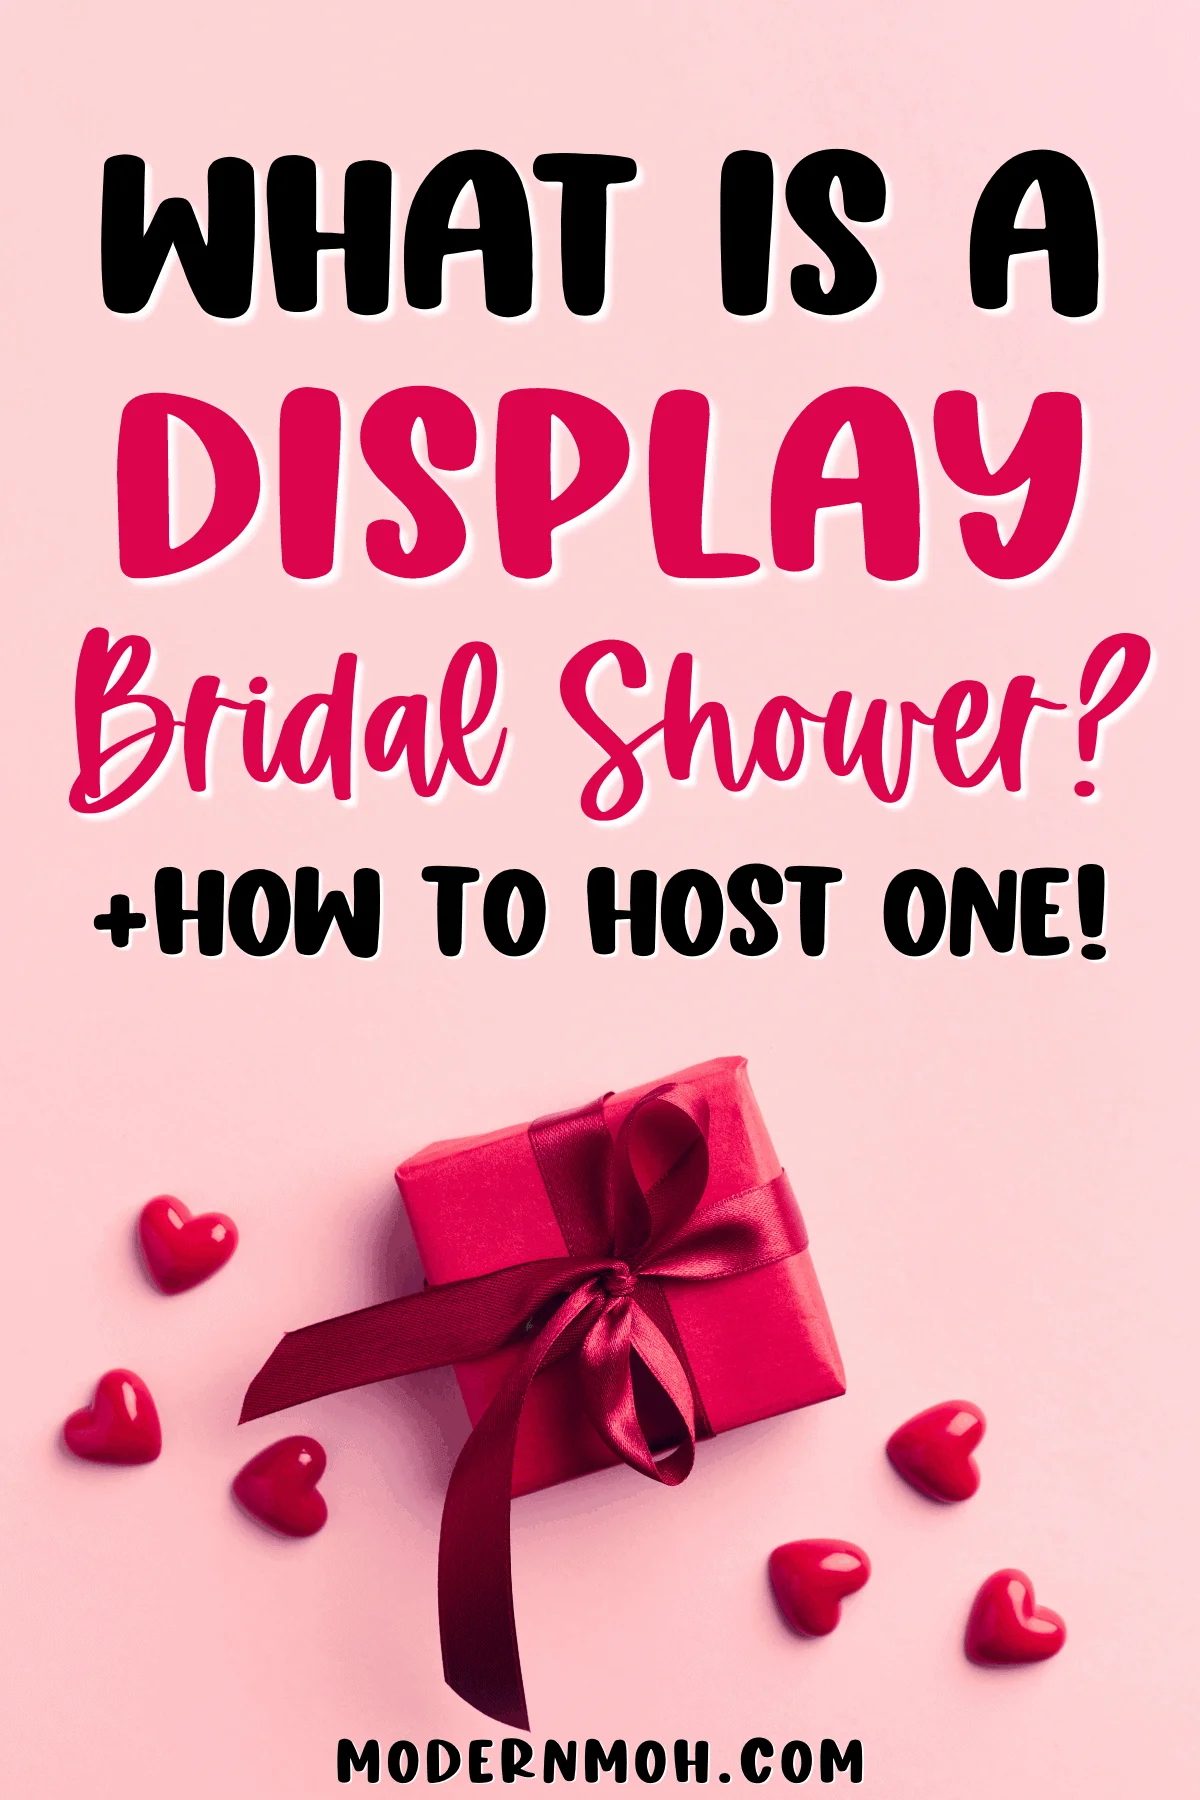 How to Host a Display Bridal Shower